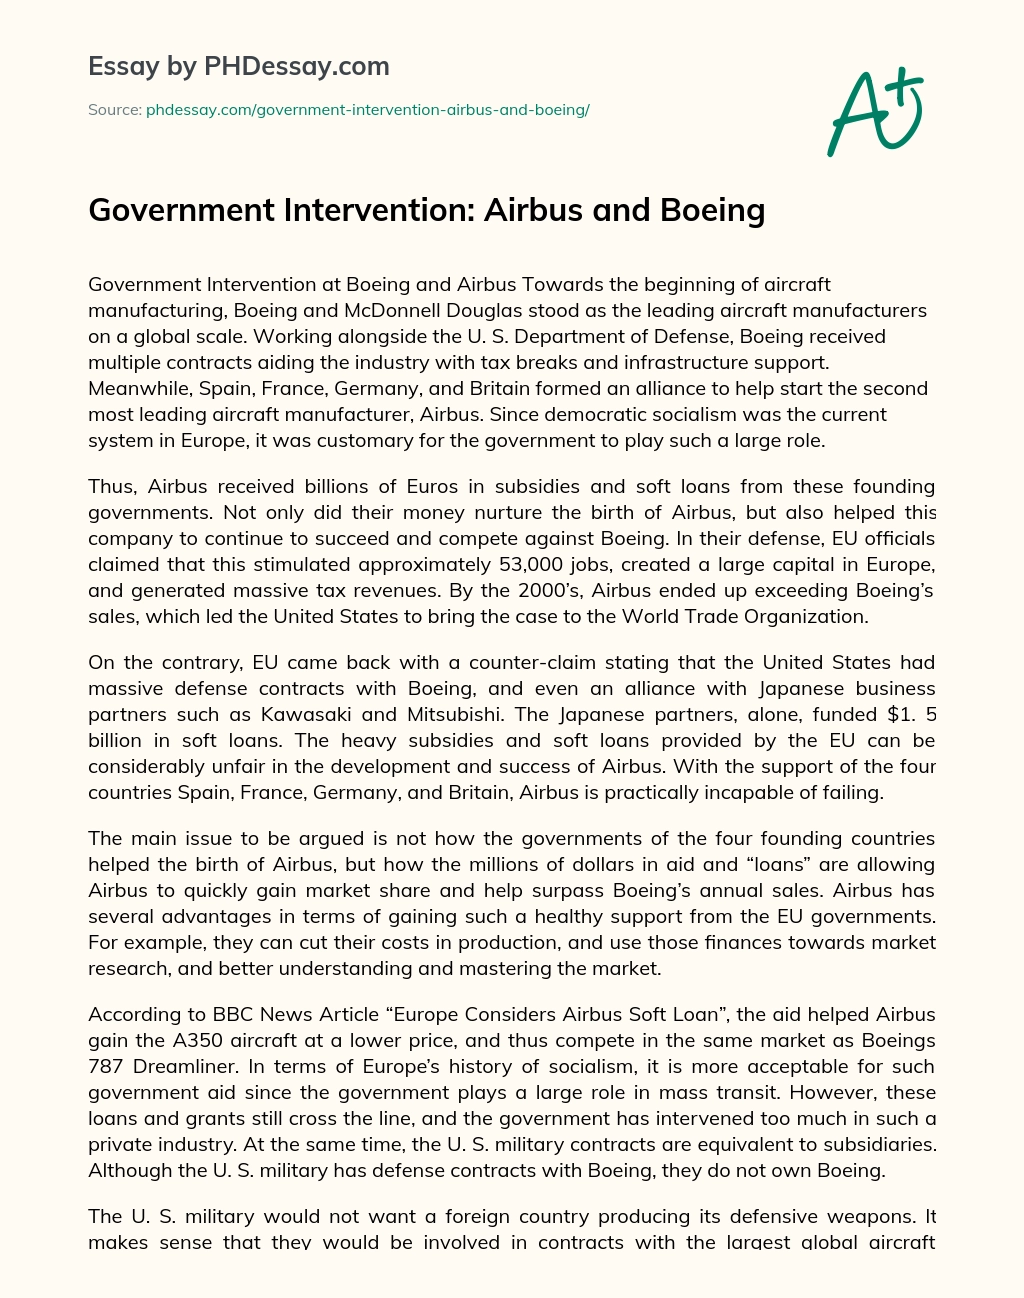 Government Intervention: Airbus and Boeing essay